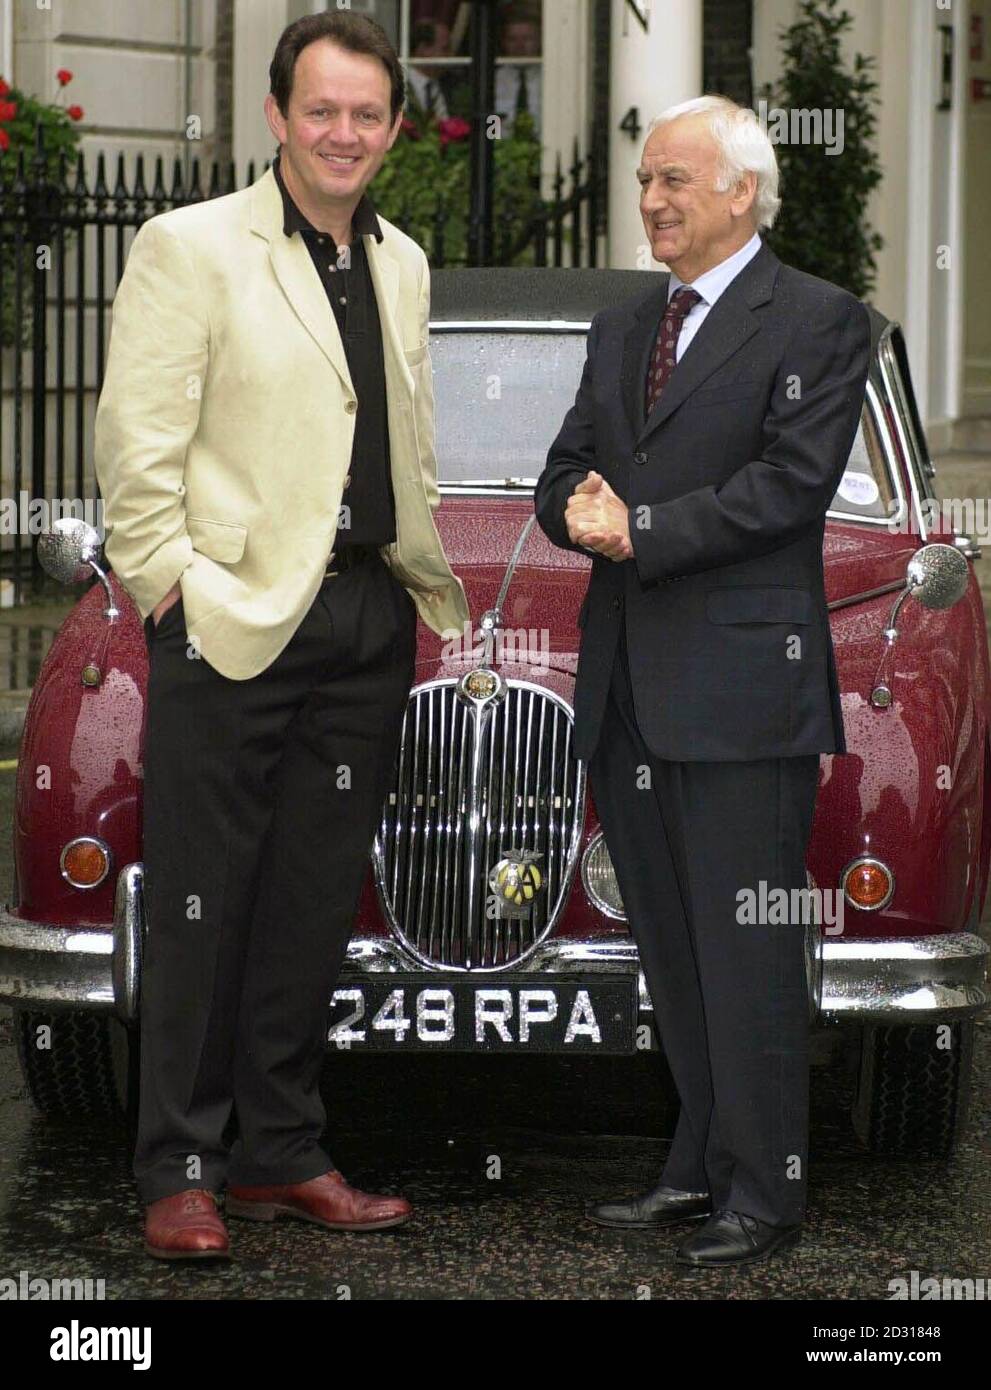 TV series Inspector Morse star John Thaw (right) and Kevin Whately, who plays Sgt Lewis, pose by Morse's Jaguar in St James's Square, central London,  before filming the last ever Inspector Morse.  Stock Photo